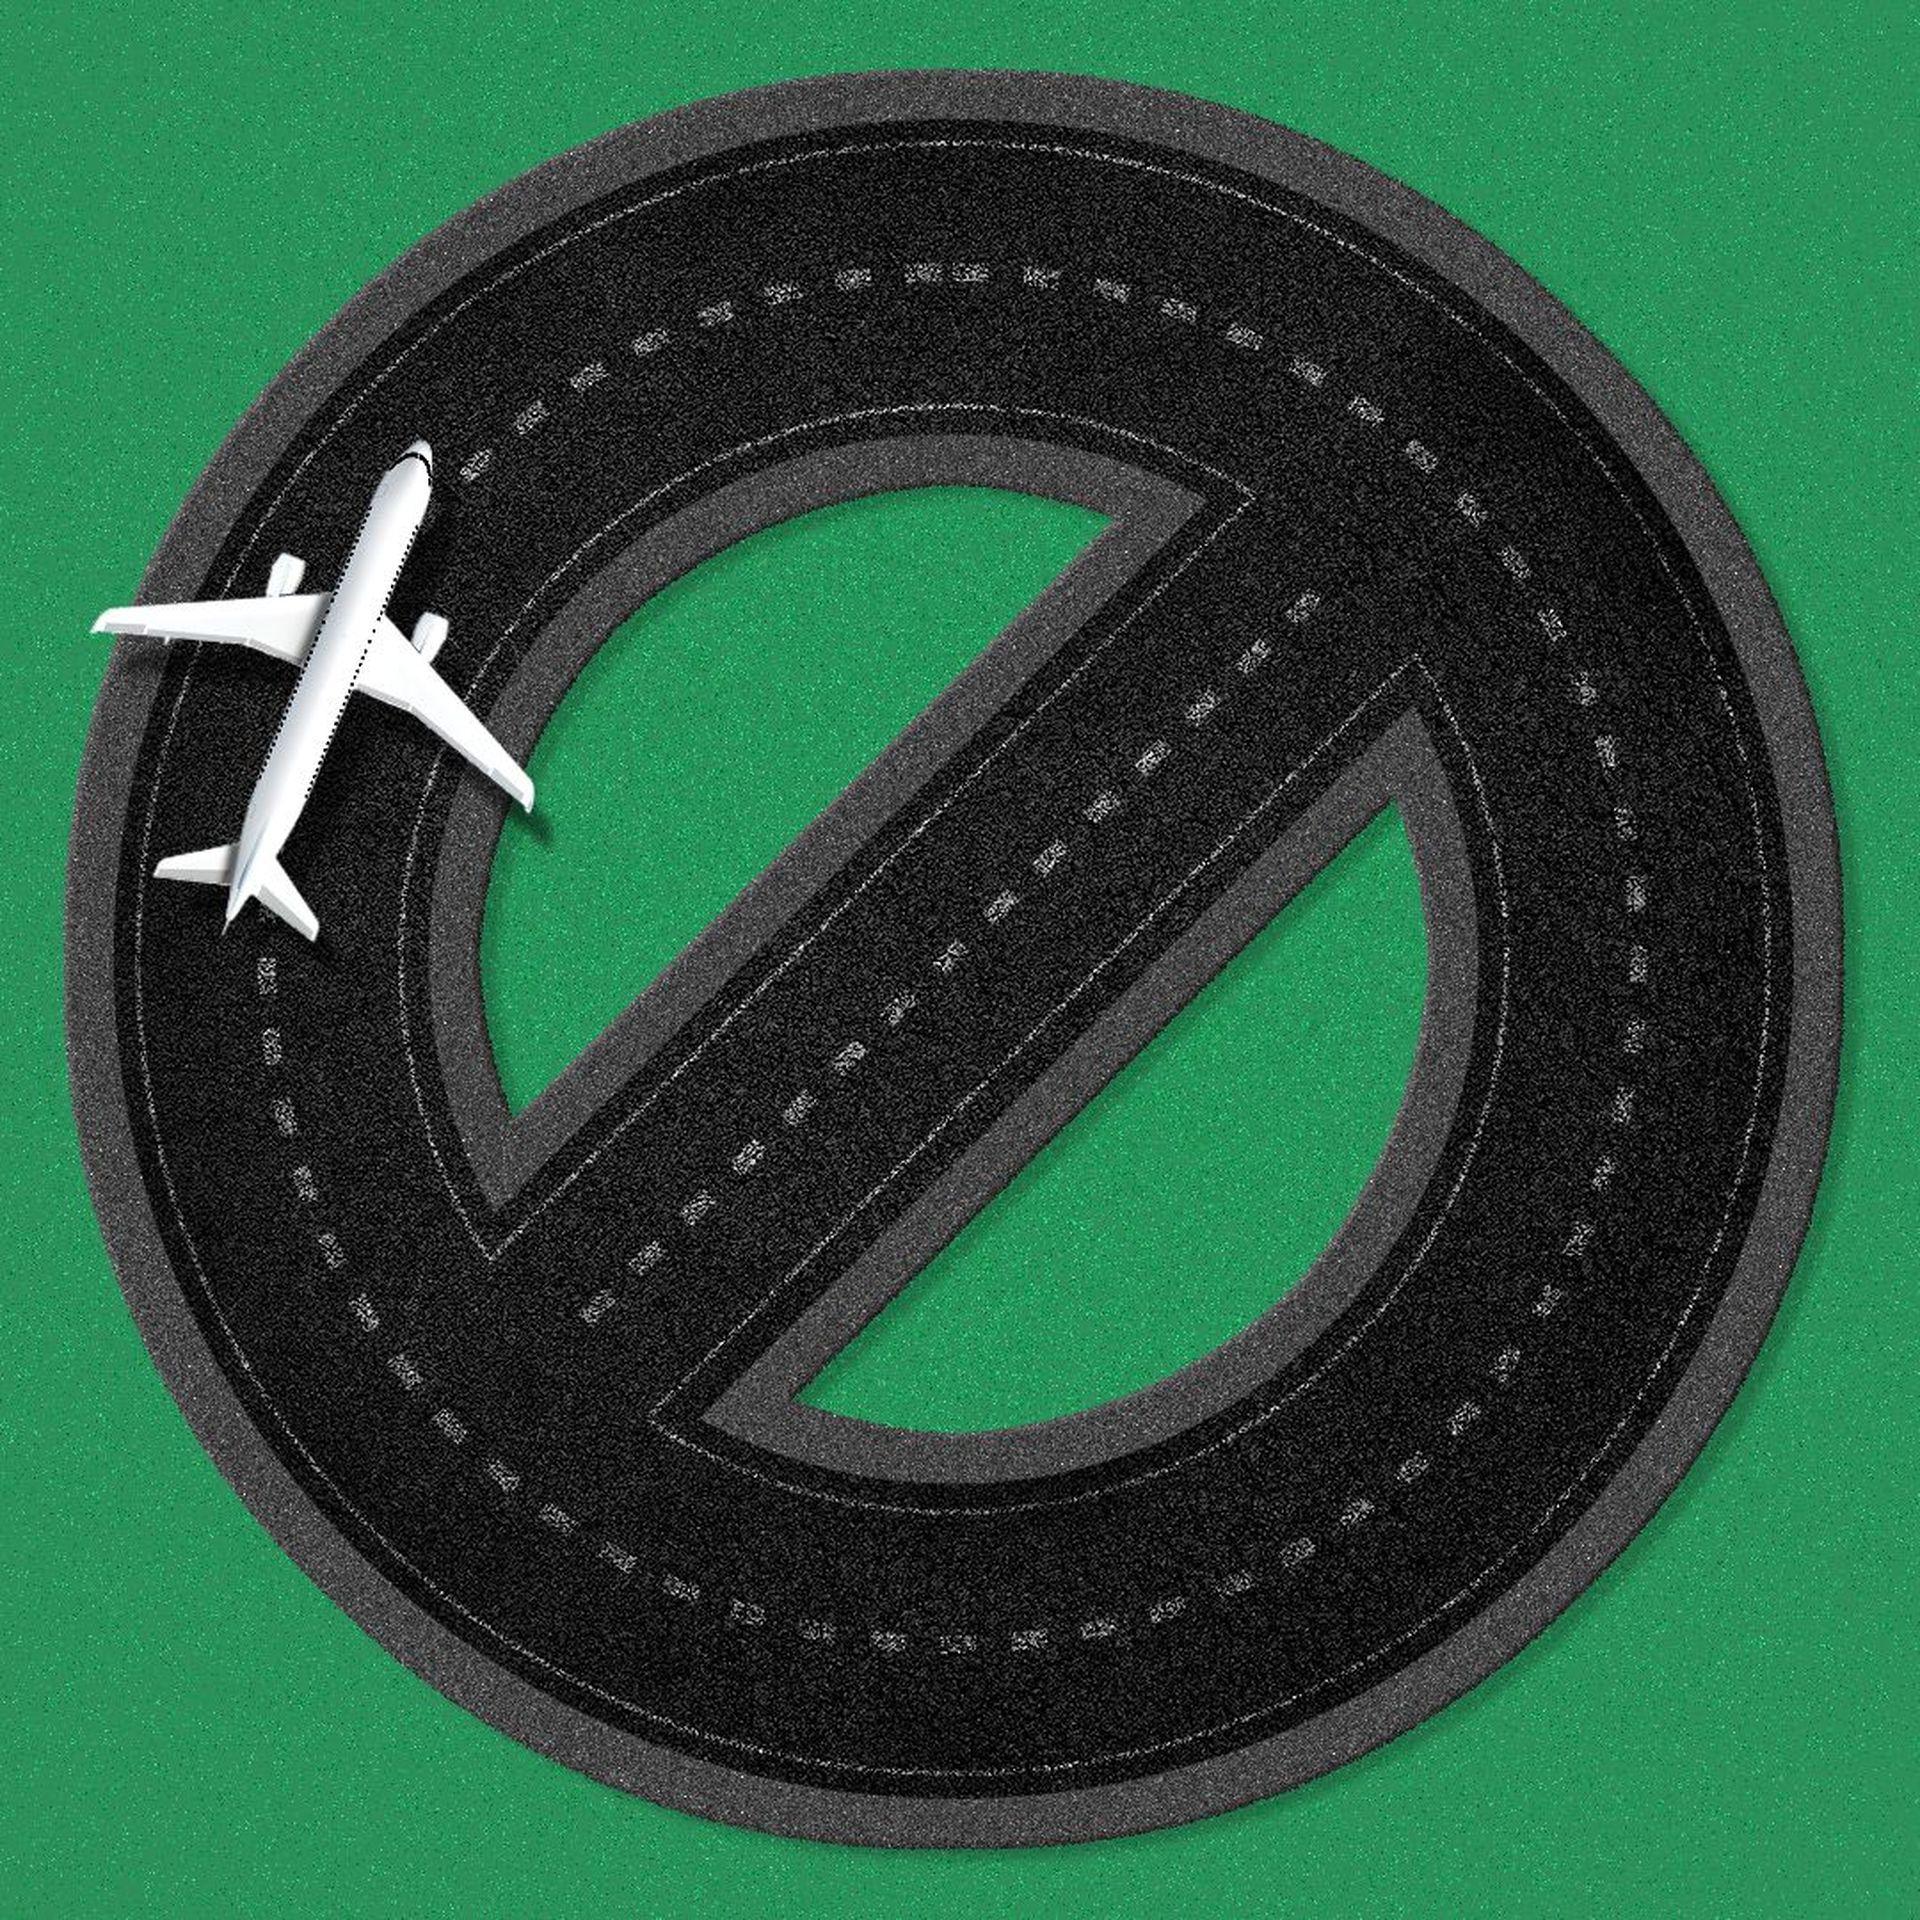 Illustration of an airplane on a runway shaped like a "no" symbol.